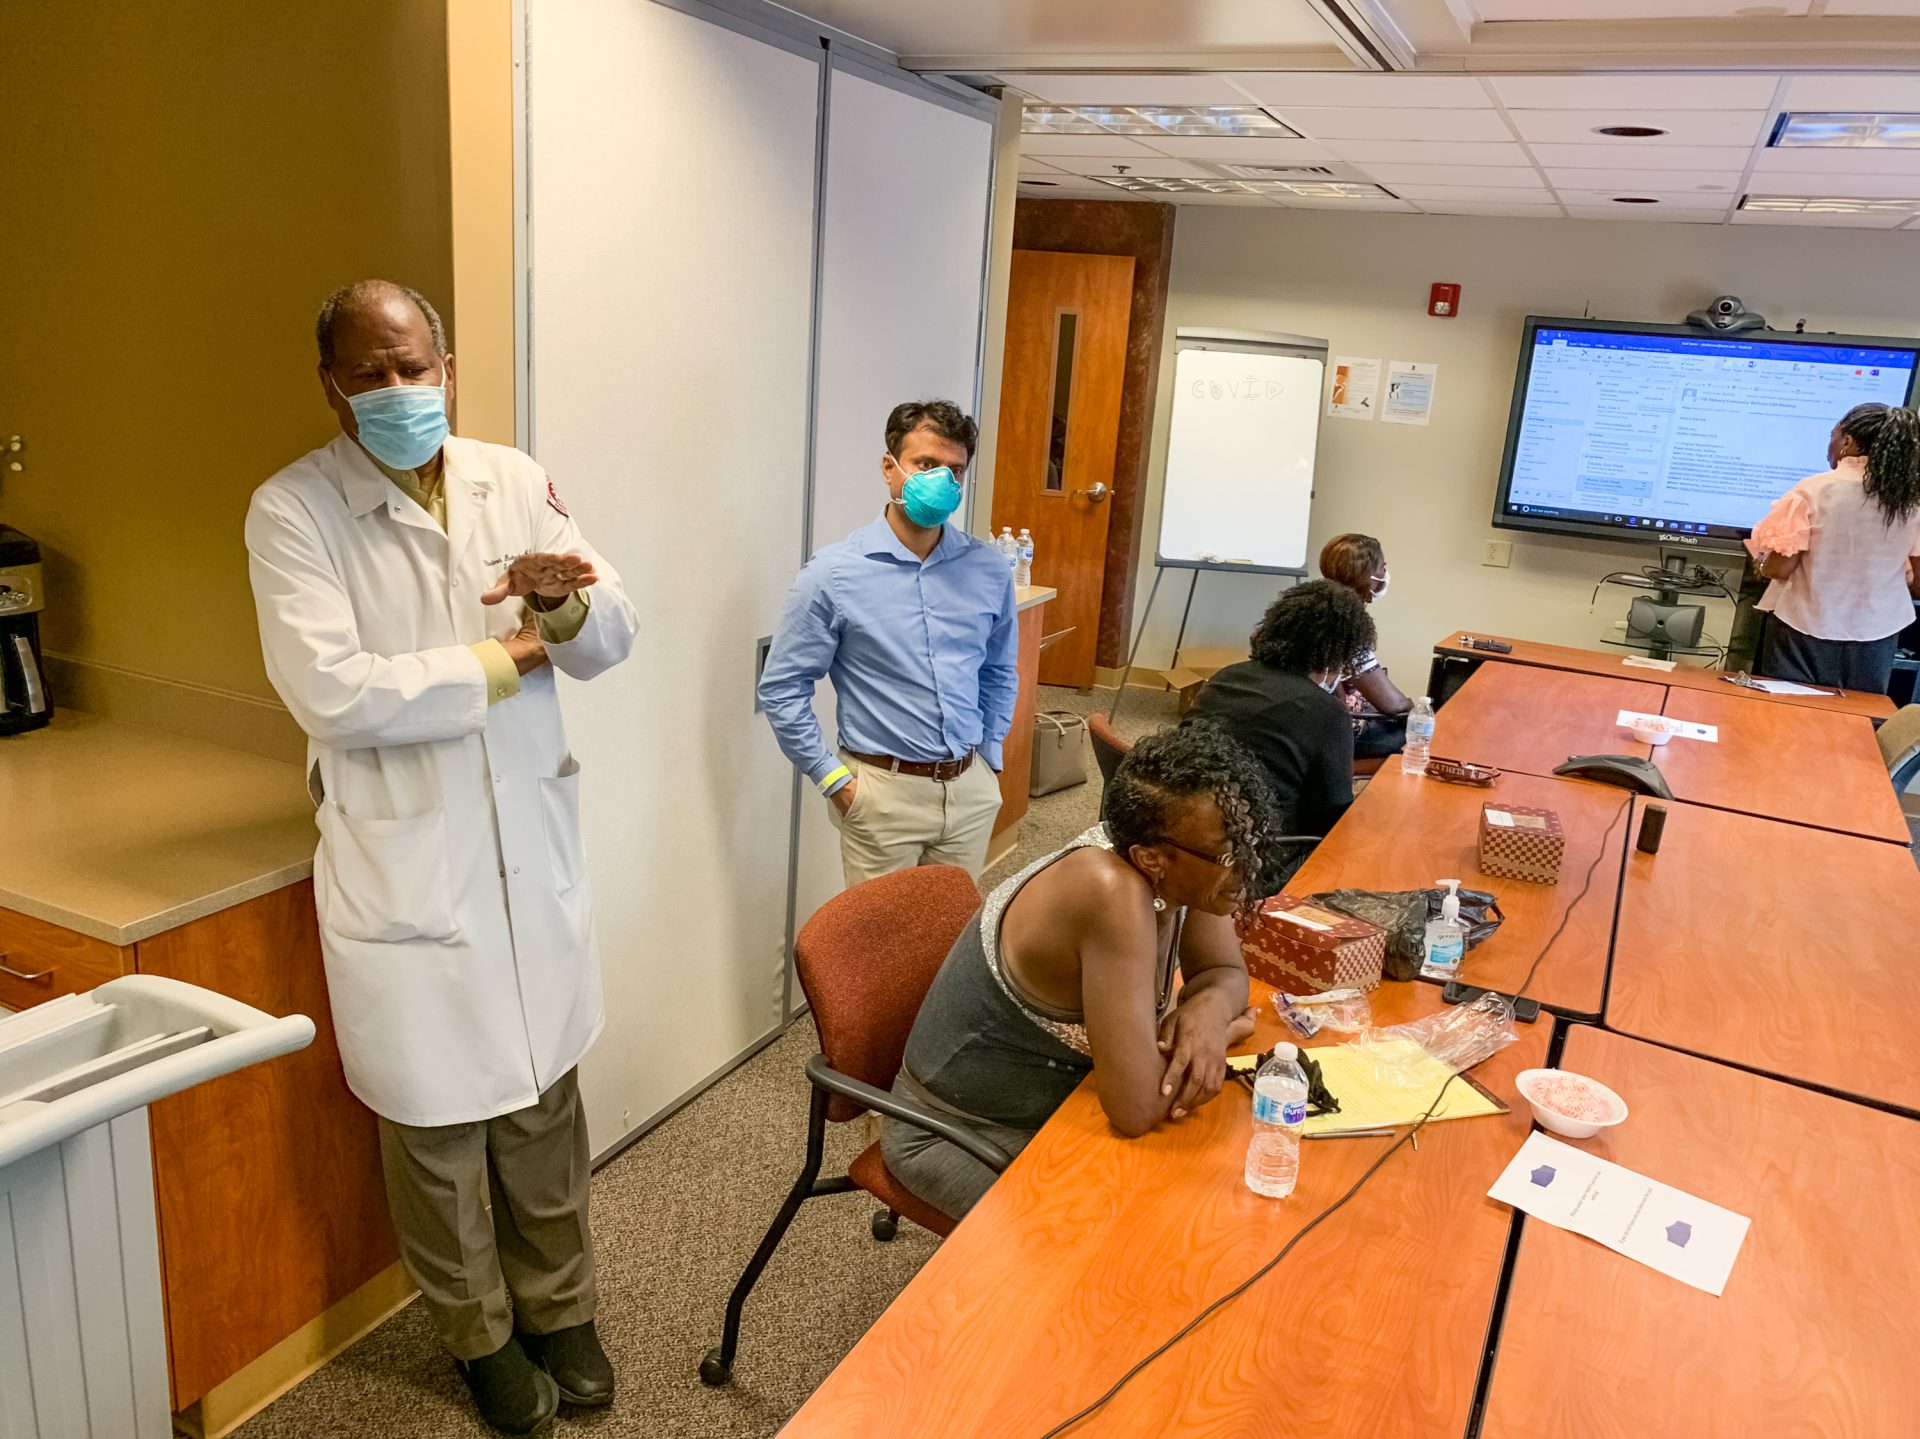 Dr. Vladimir Berthaud and Dr. Rajbir Singh are leading a COVID-19 vaccine trial site at Meharry Medical College in Nashville, starting with the Novavax vaccine in October. They're just now beginning the recruitment process, starting with a presentation to Dr. Berthaud's long-time HIV patients.